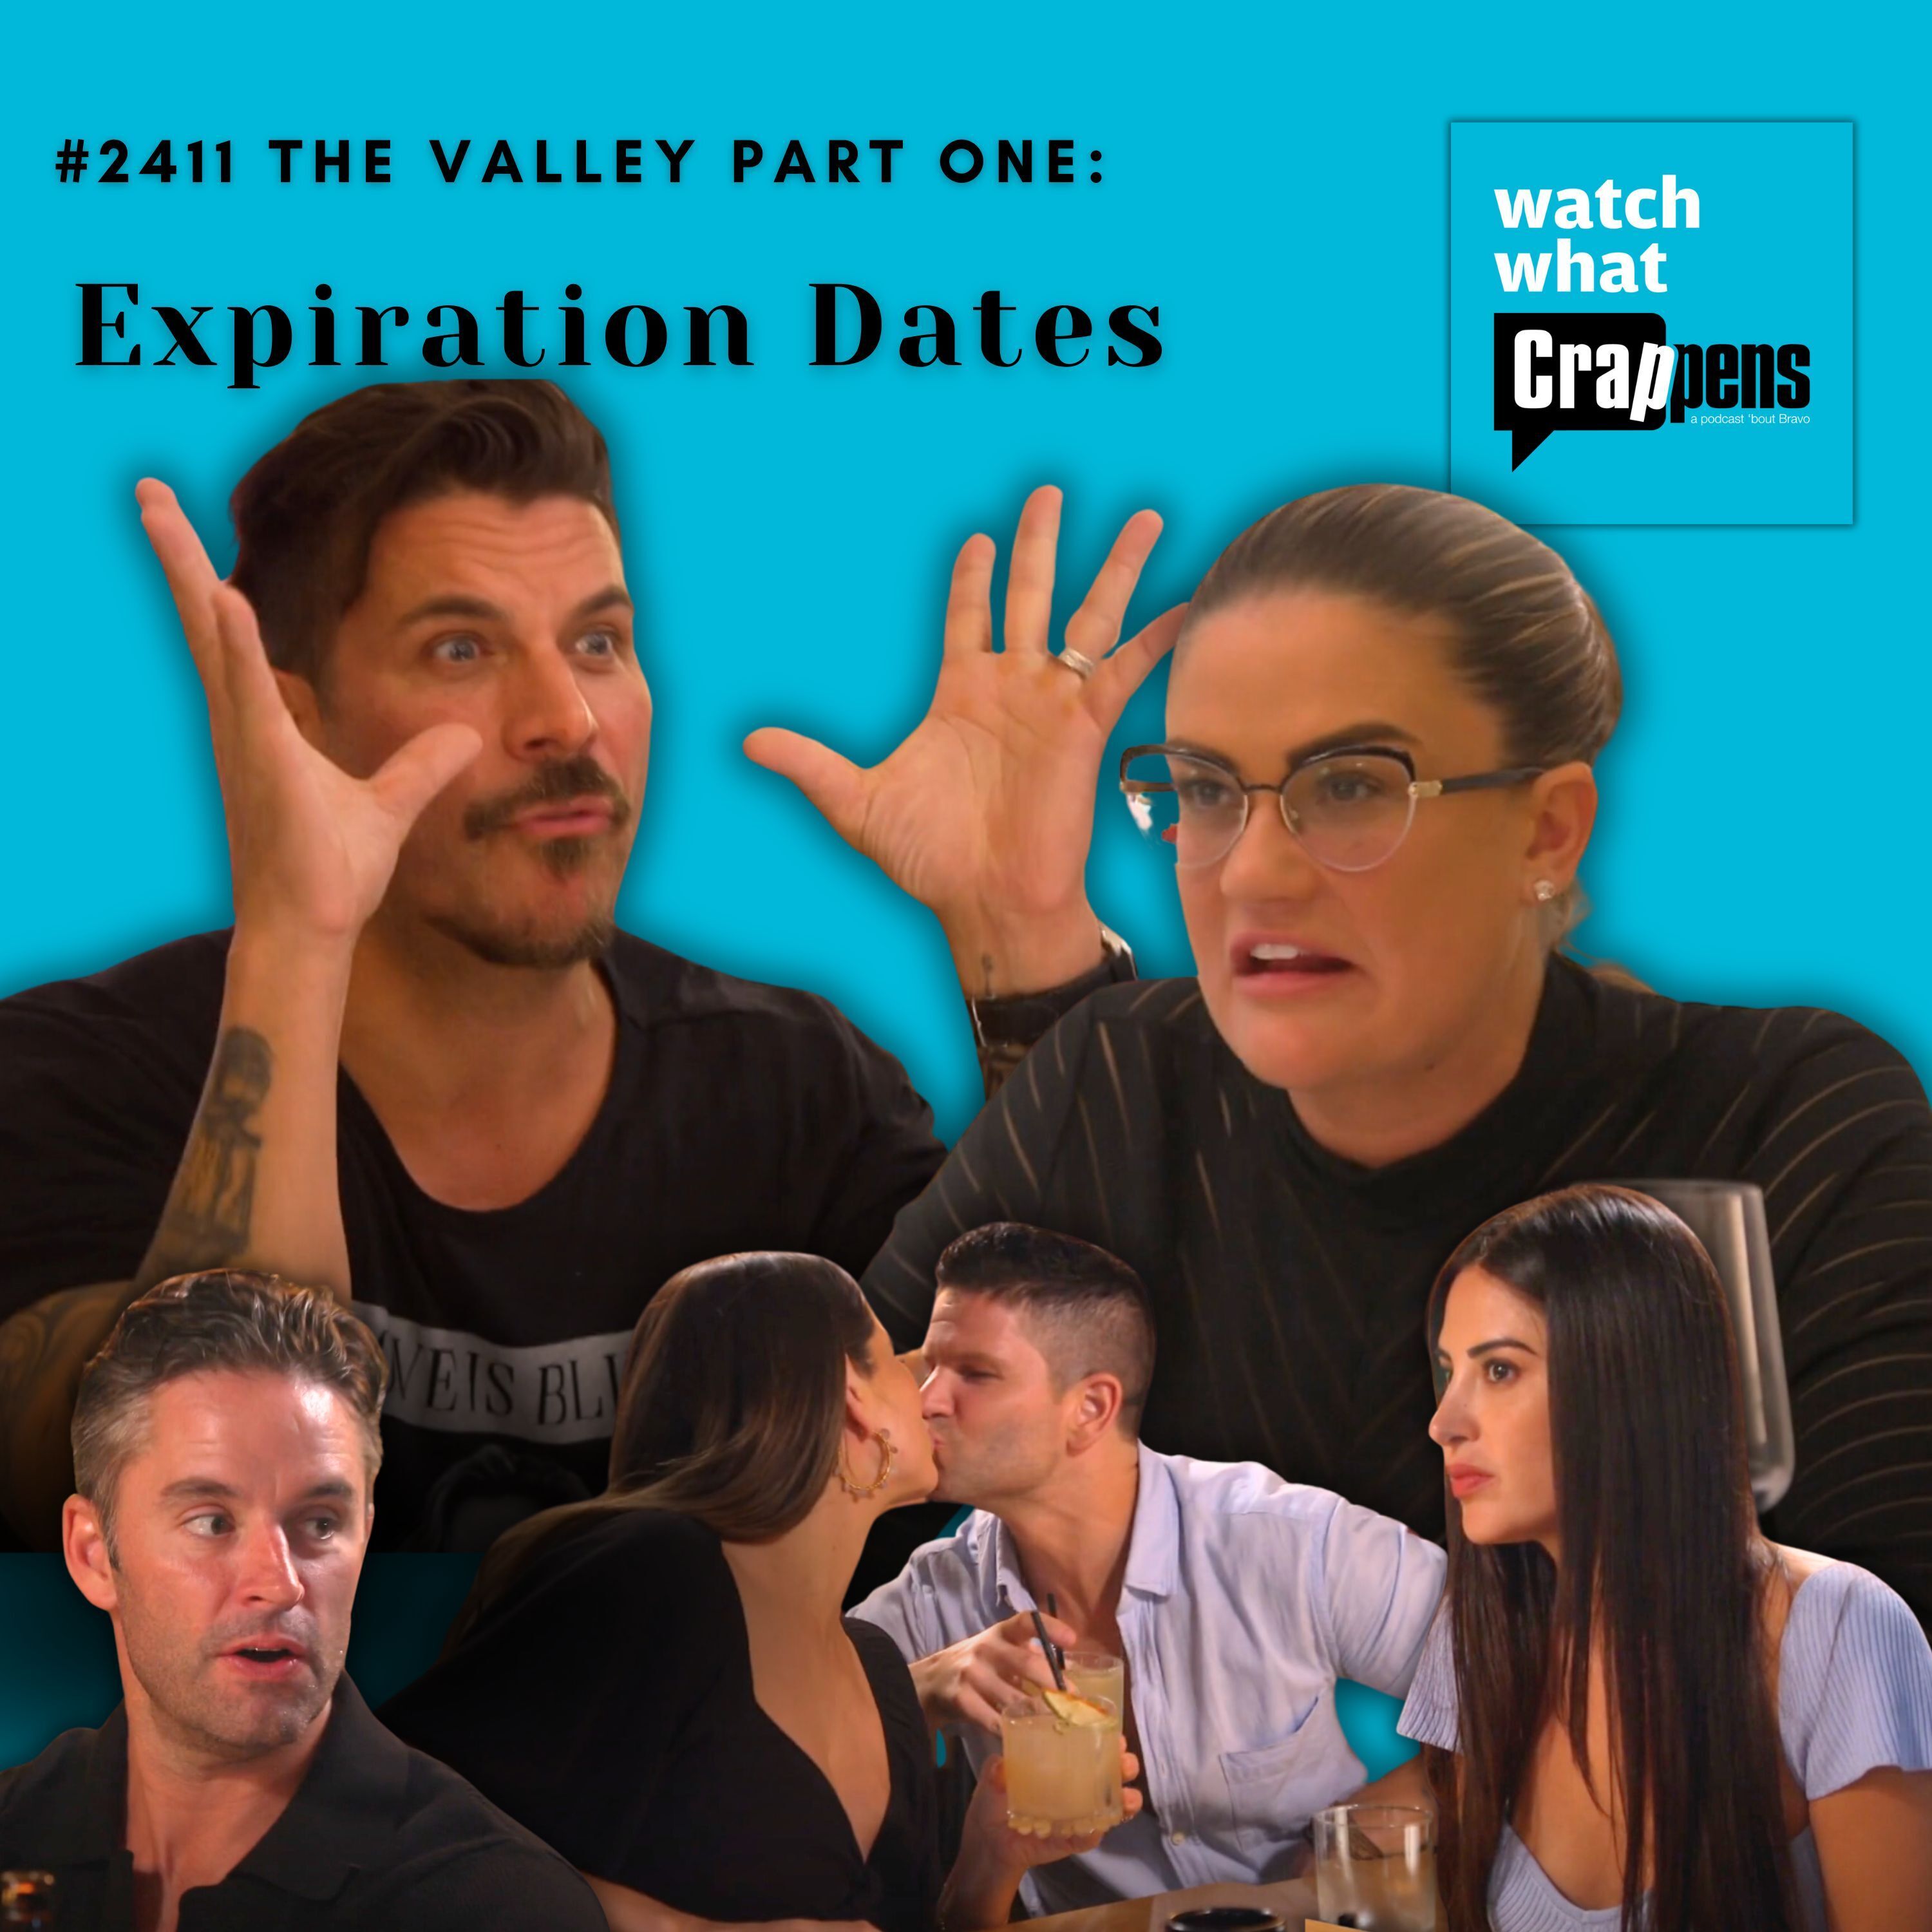 #2411 The Valley Part One: Expiration Dates